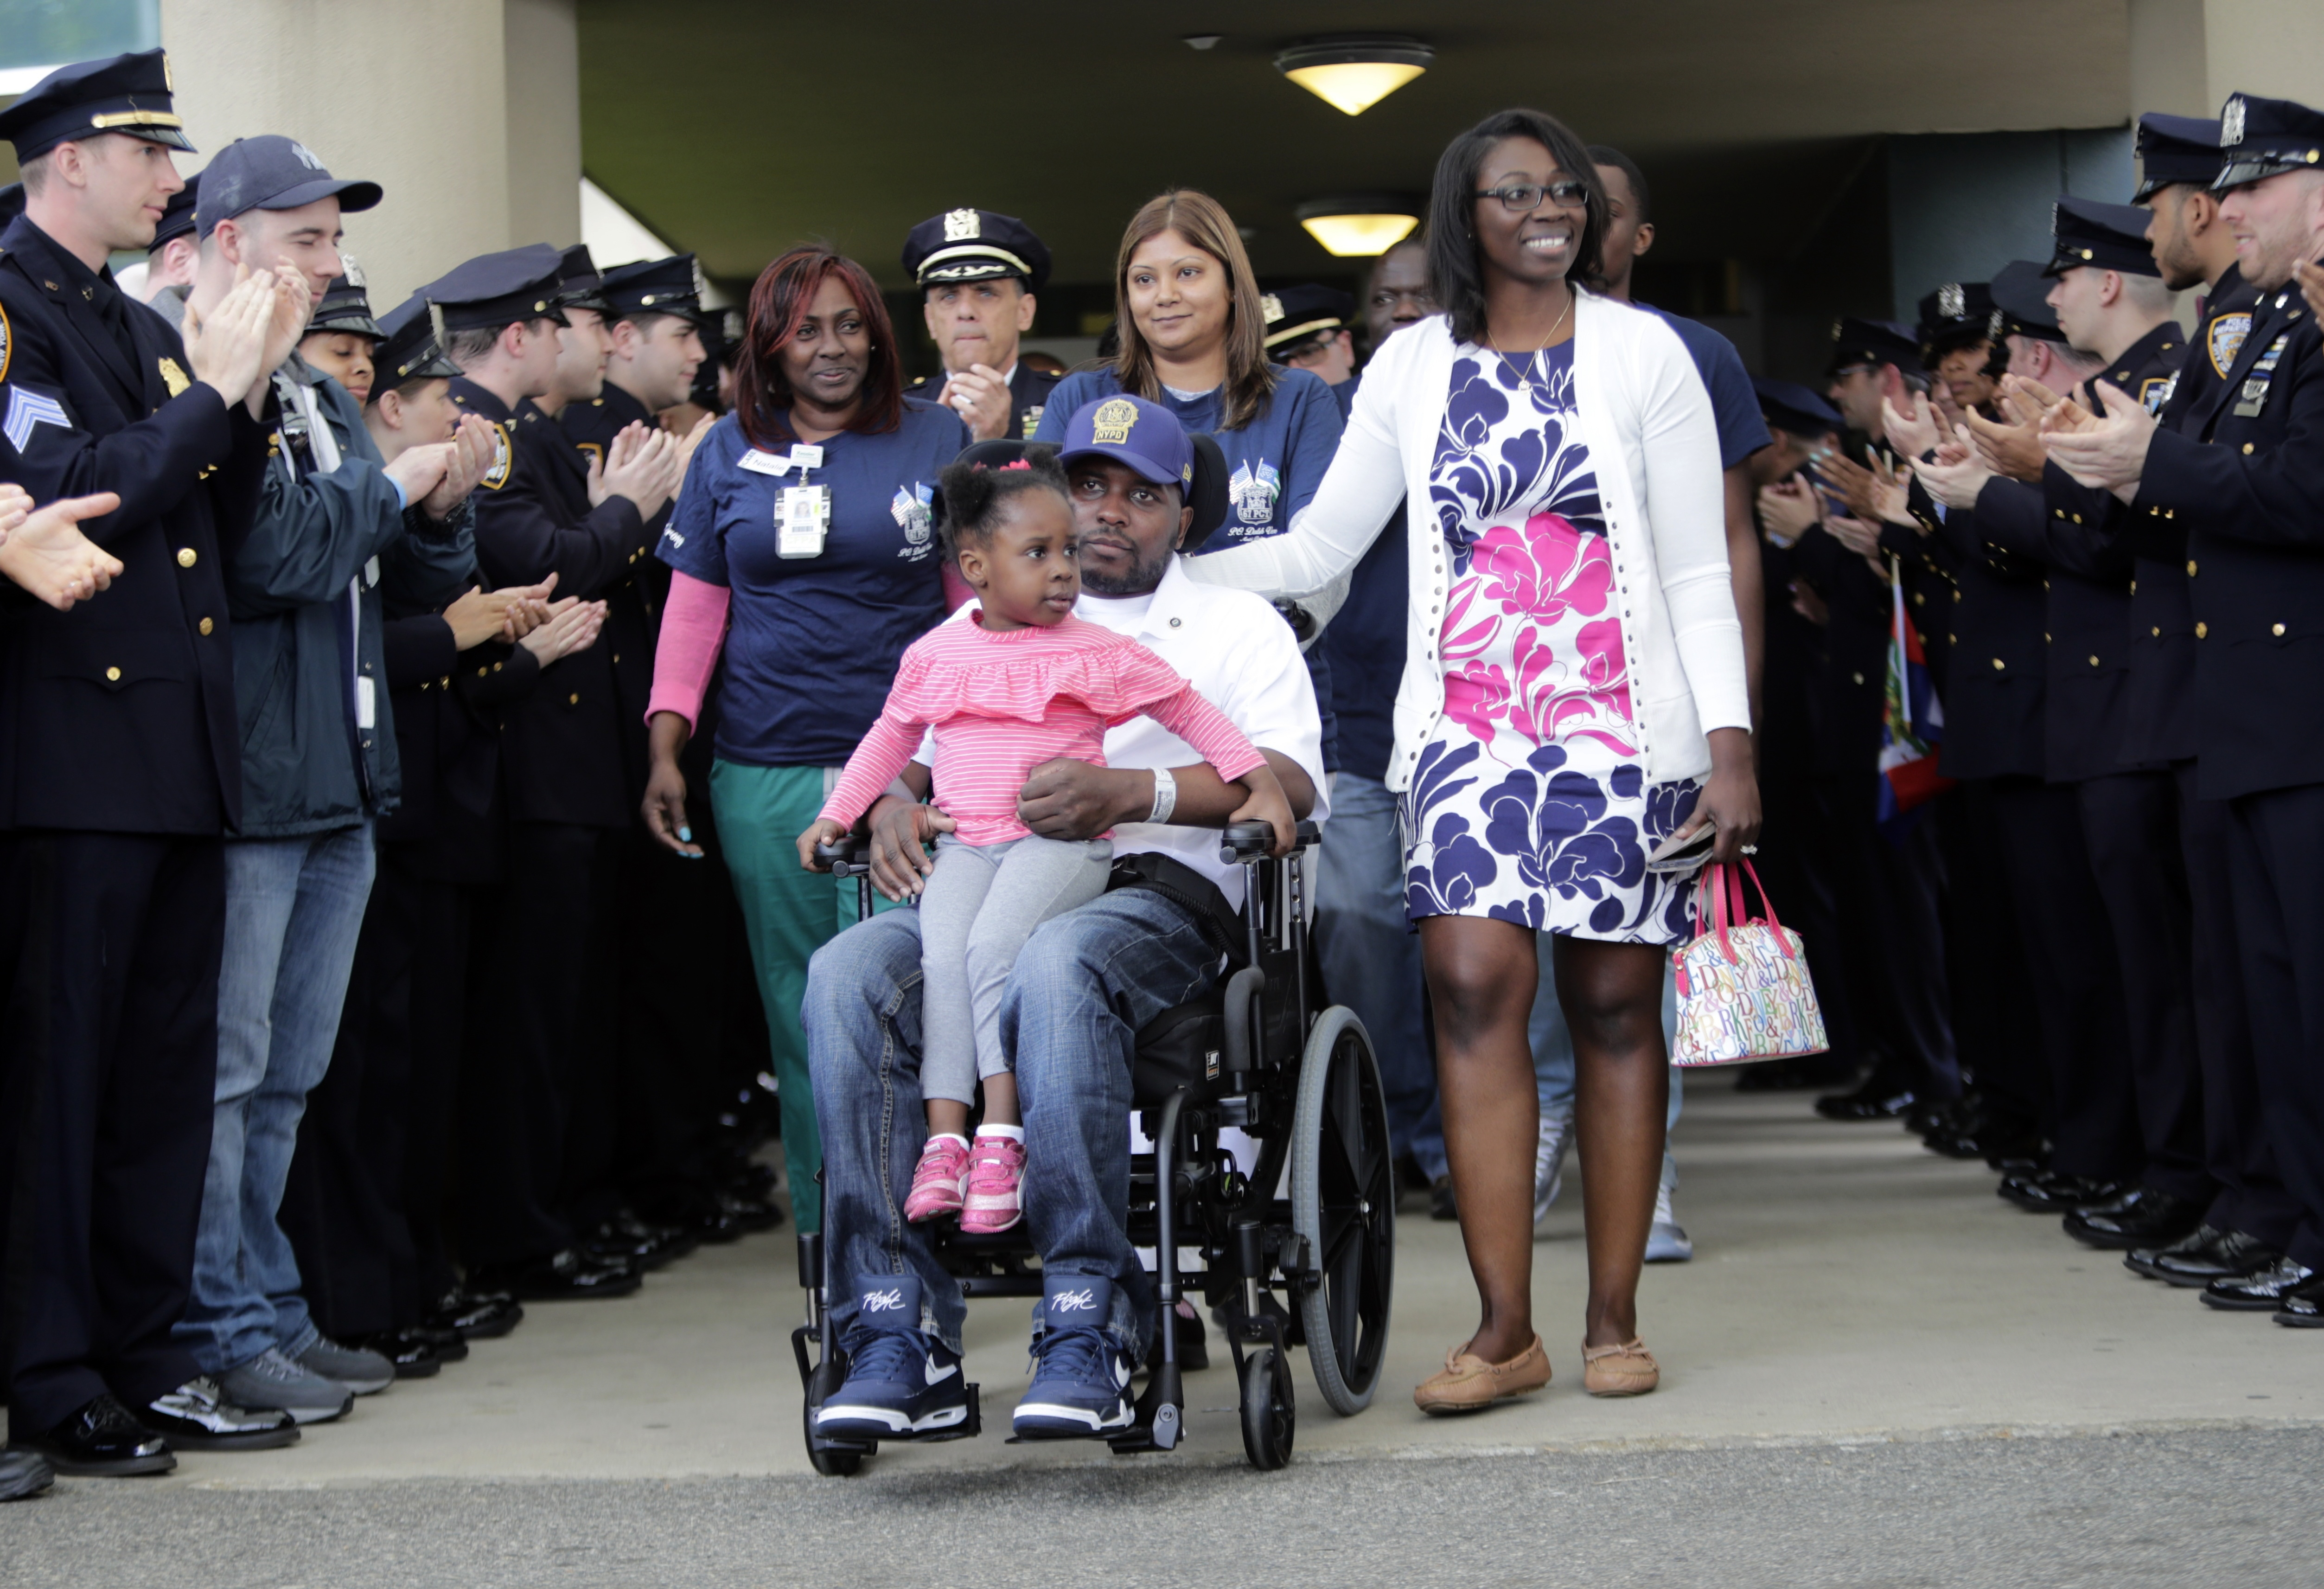 New York Police Detective Dalsh Veve (center) leaves the Kessler Institute for Rehabilitation with his wife, Esther (right) and daughter Dashi on May 7 in West Orange, New Jersey. Veve was critically injured in June 2017 when he was dragged by a driver in a stolen car. AP Photo/Frank Franklin II